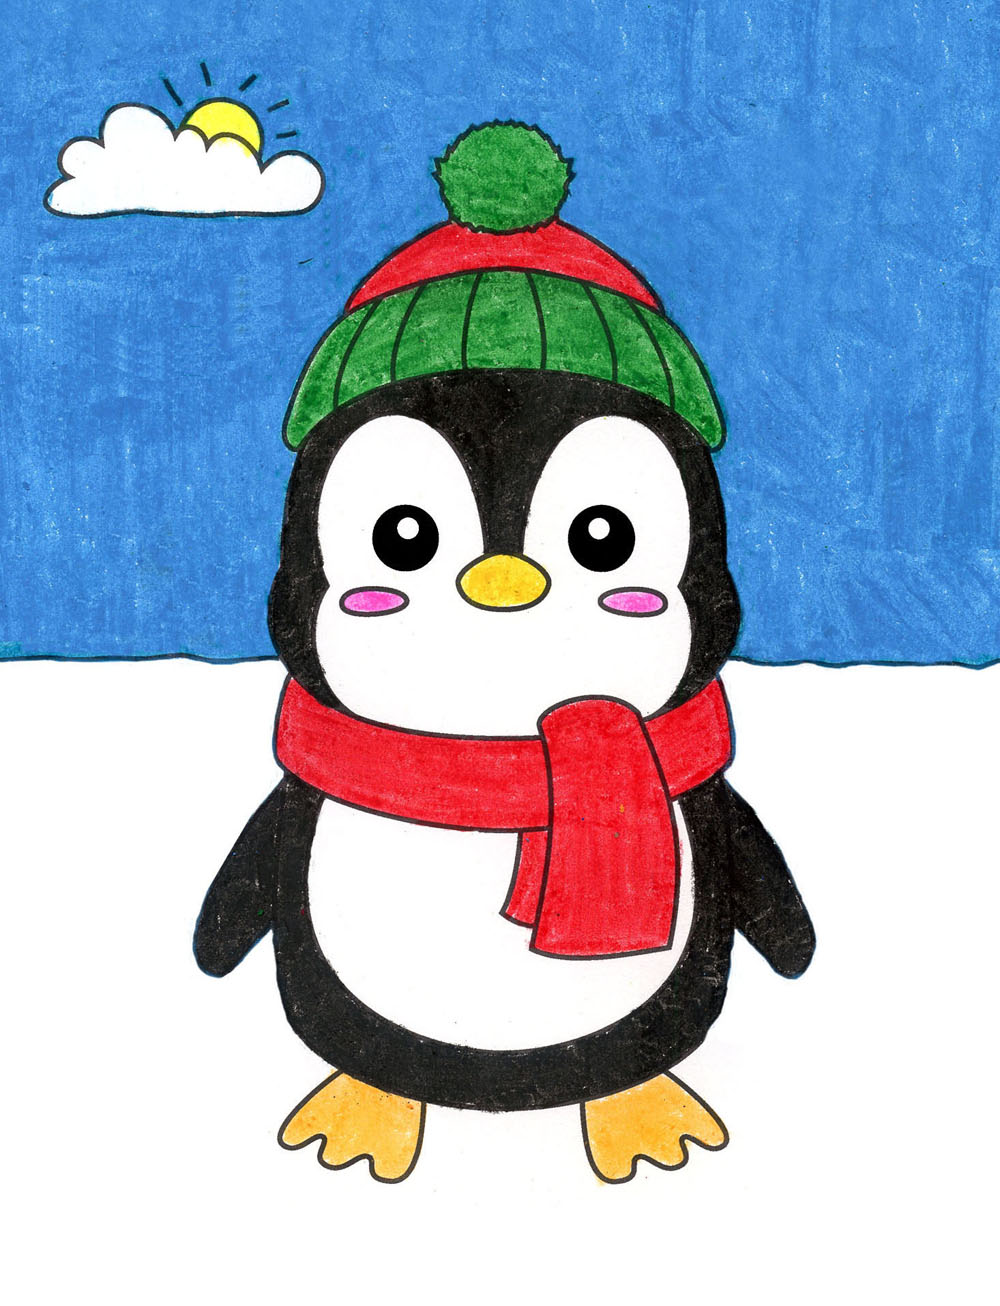 How To Draw A Cute Penguin Art Projects For Kids How to draw a penguin chick: to draw a cute penguin art projects